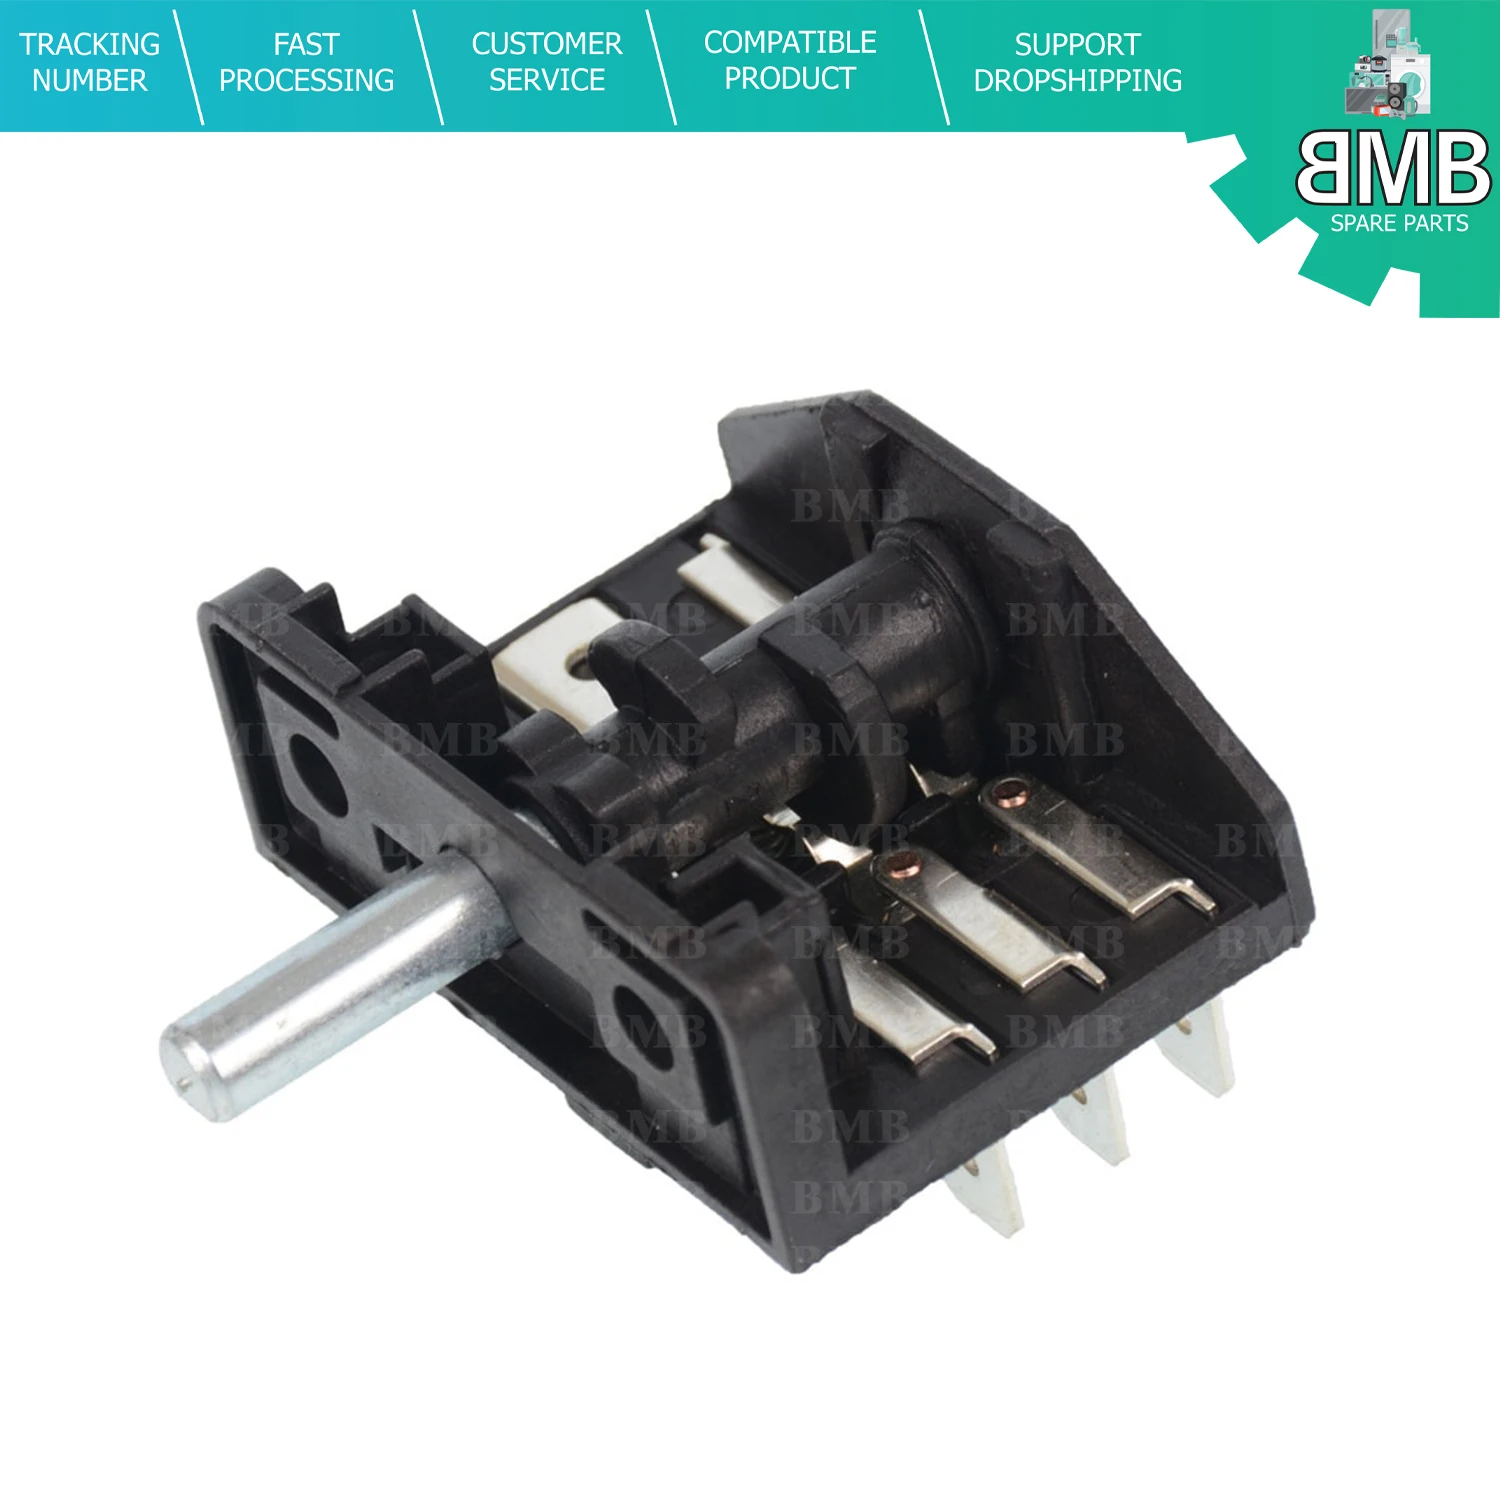 

19mm 3 Way Steel Oven Rotary Switch 250 V 16A Compatible With Various Models And Brands